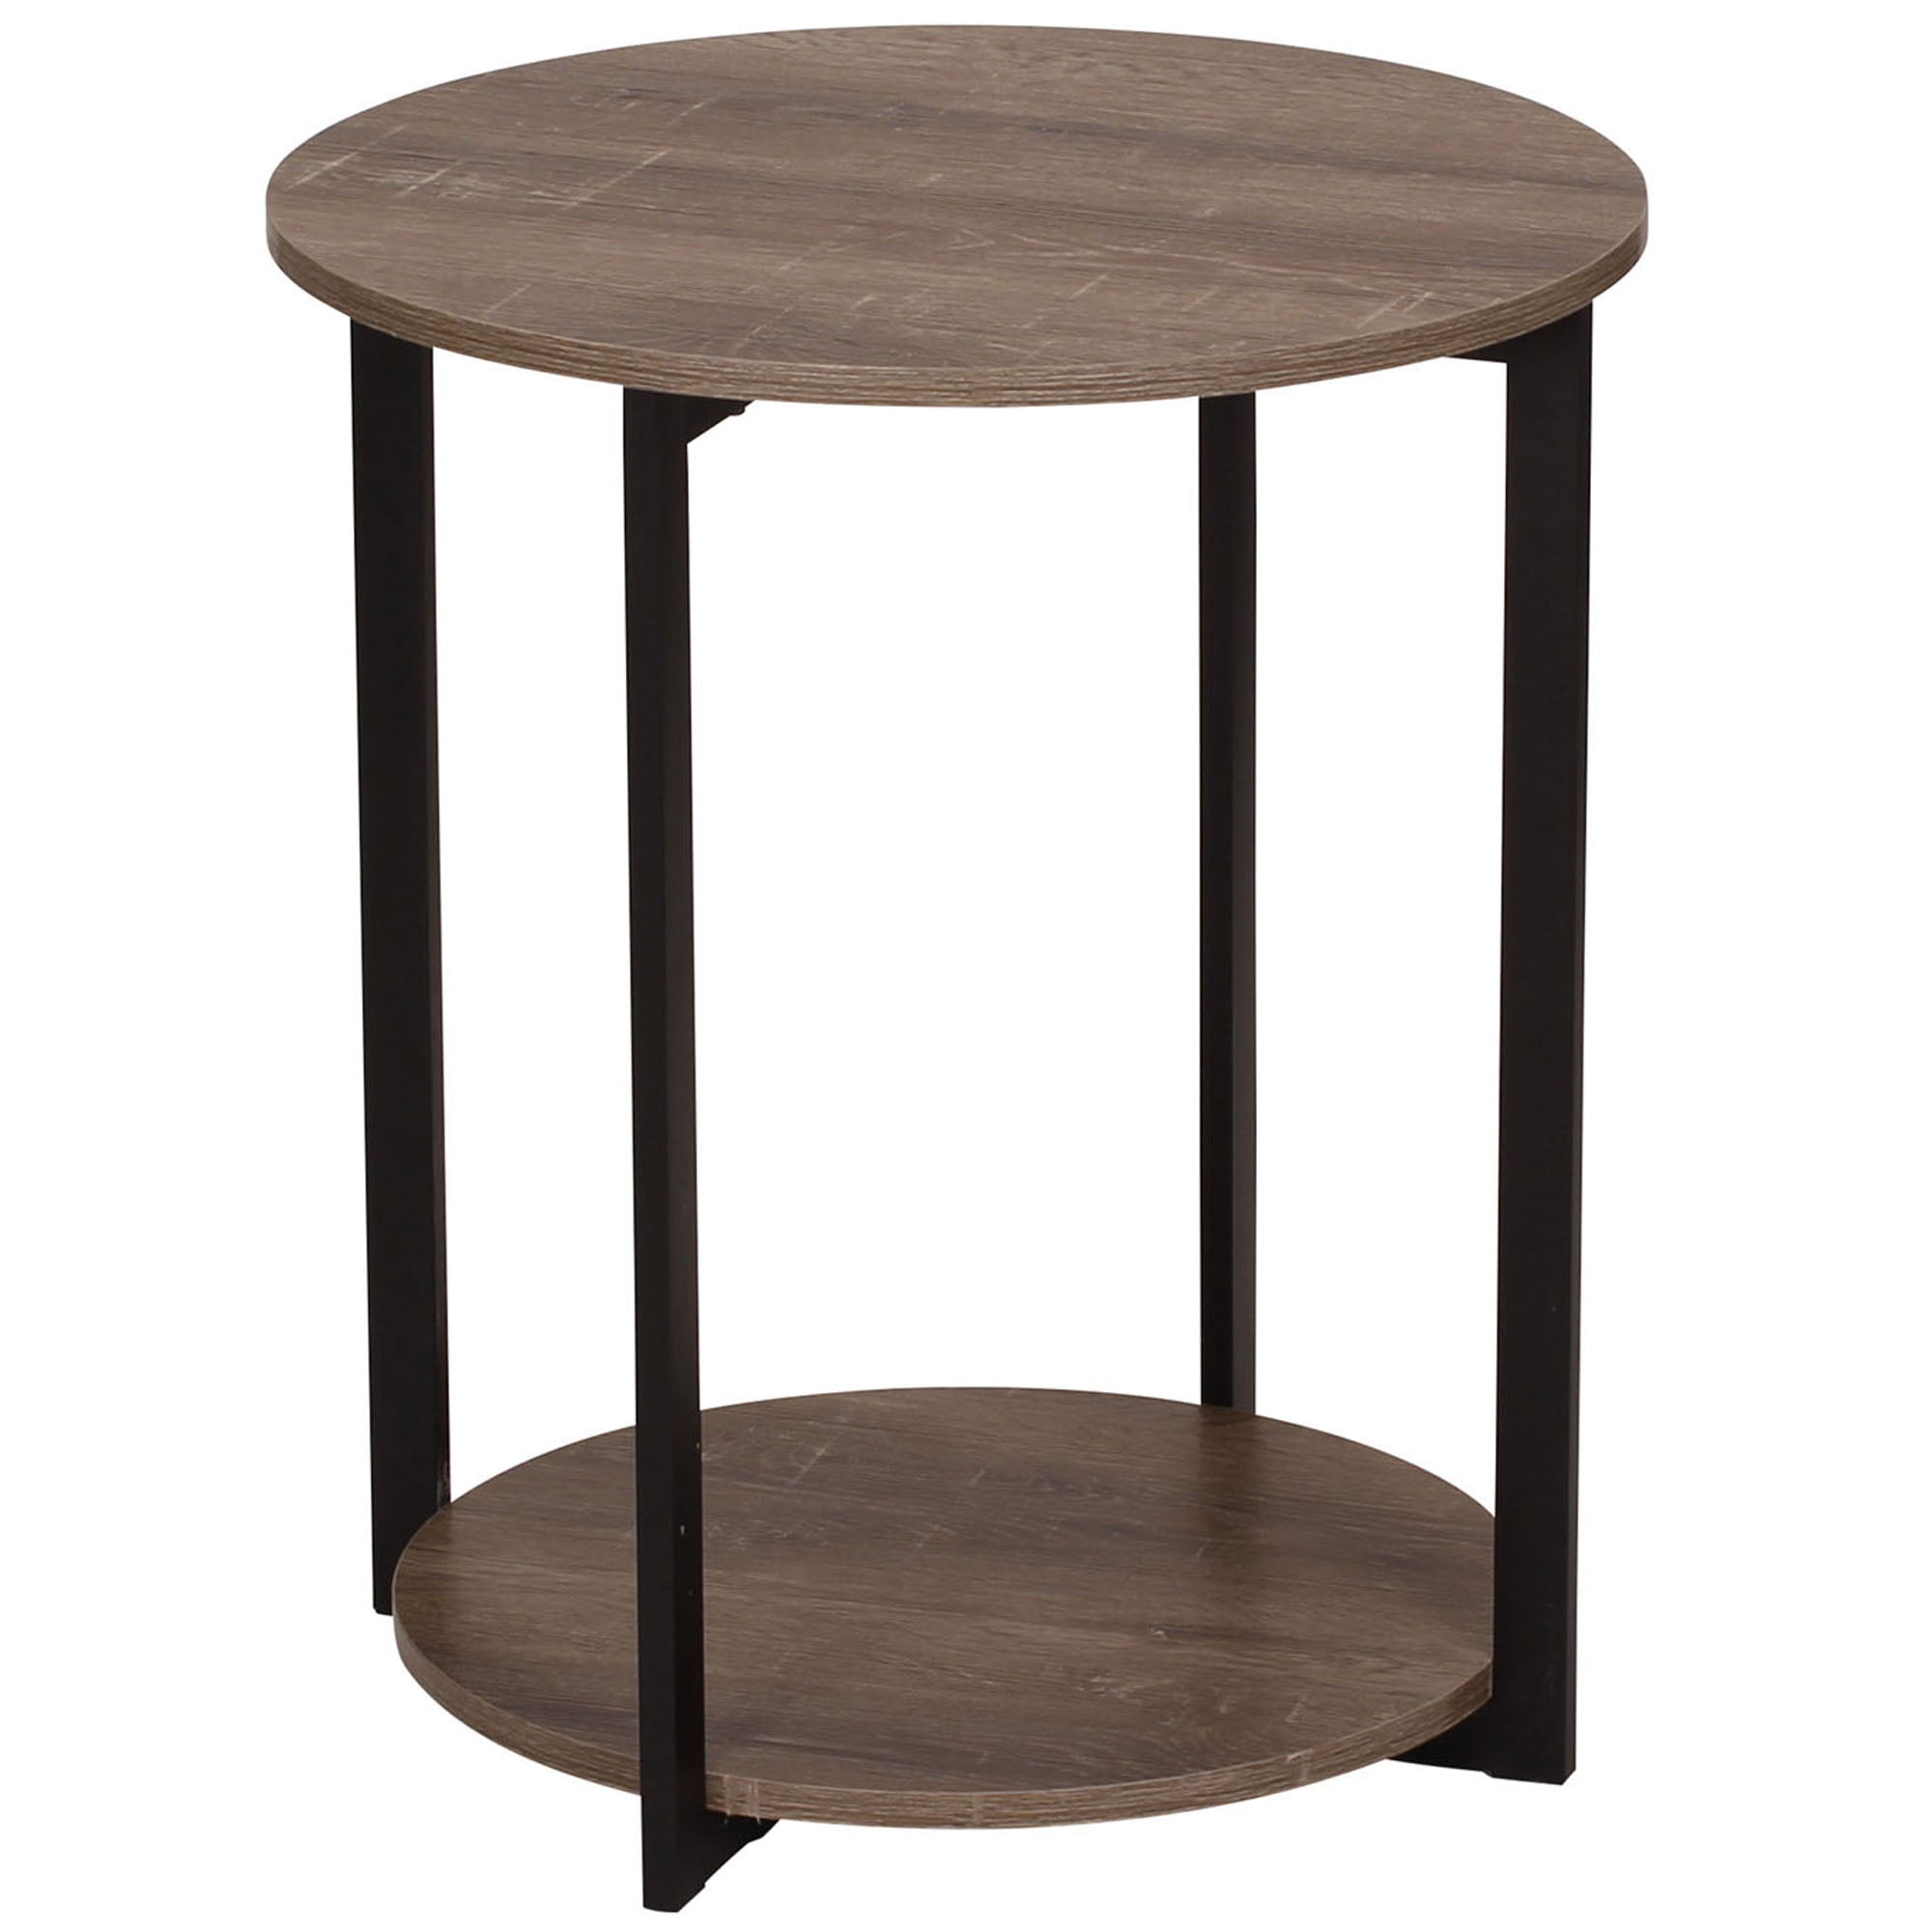 Details about   North Avenue Side Table Bedroom Living Room Furniture Charter Oak Finish.New HOT 